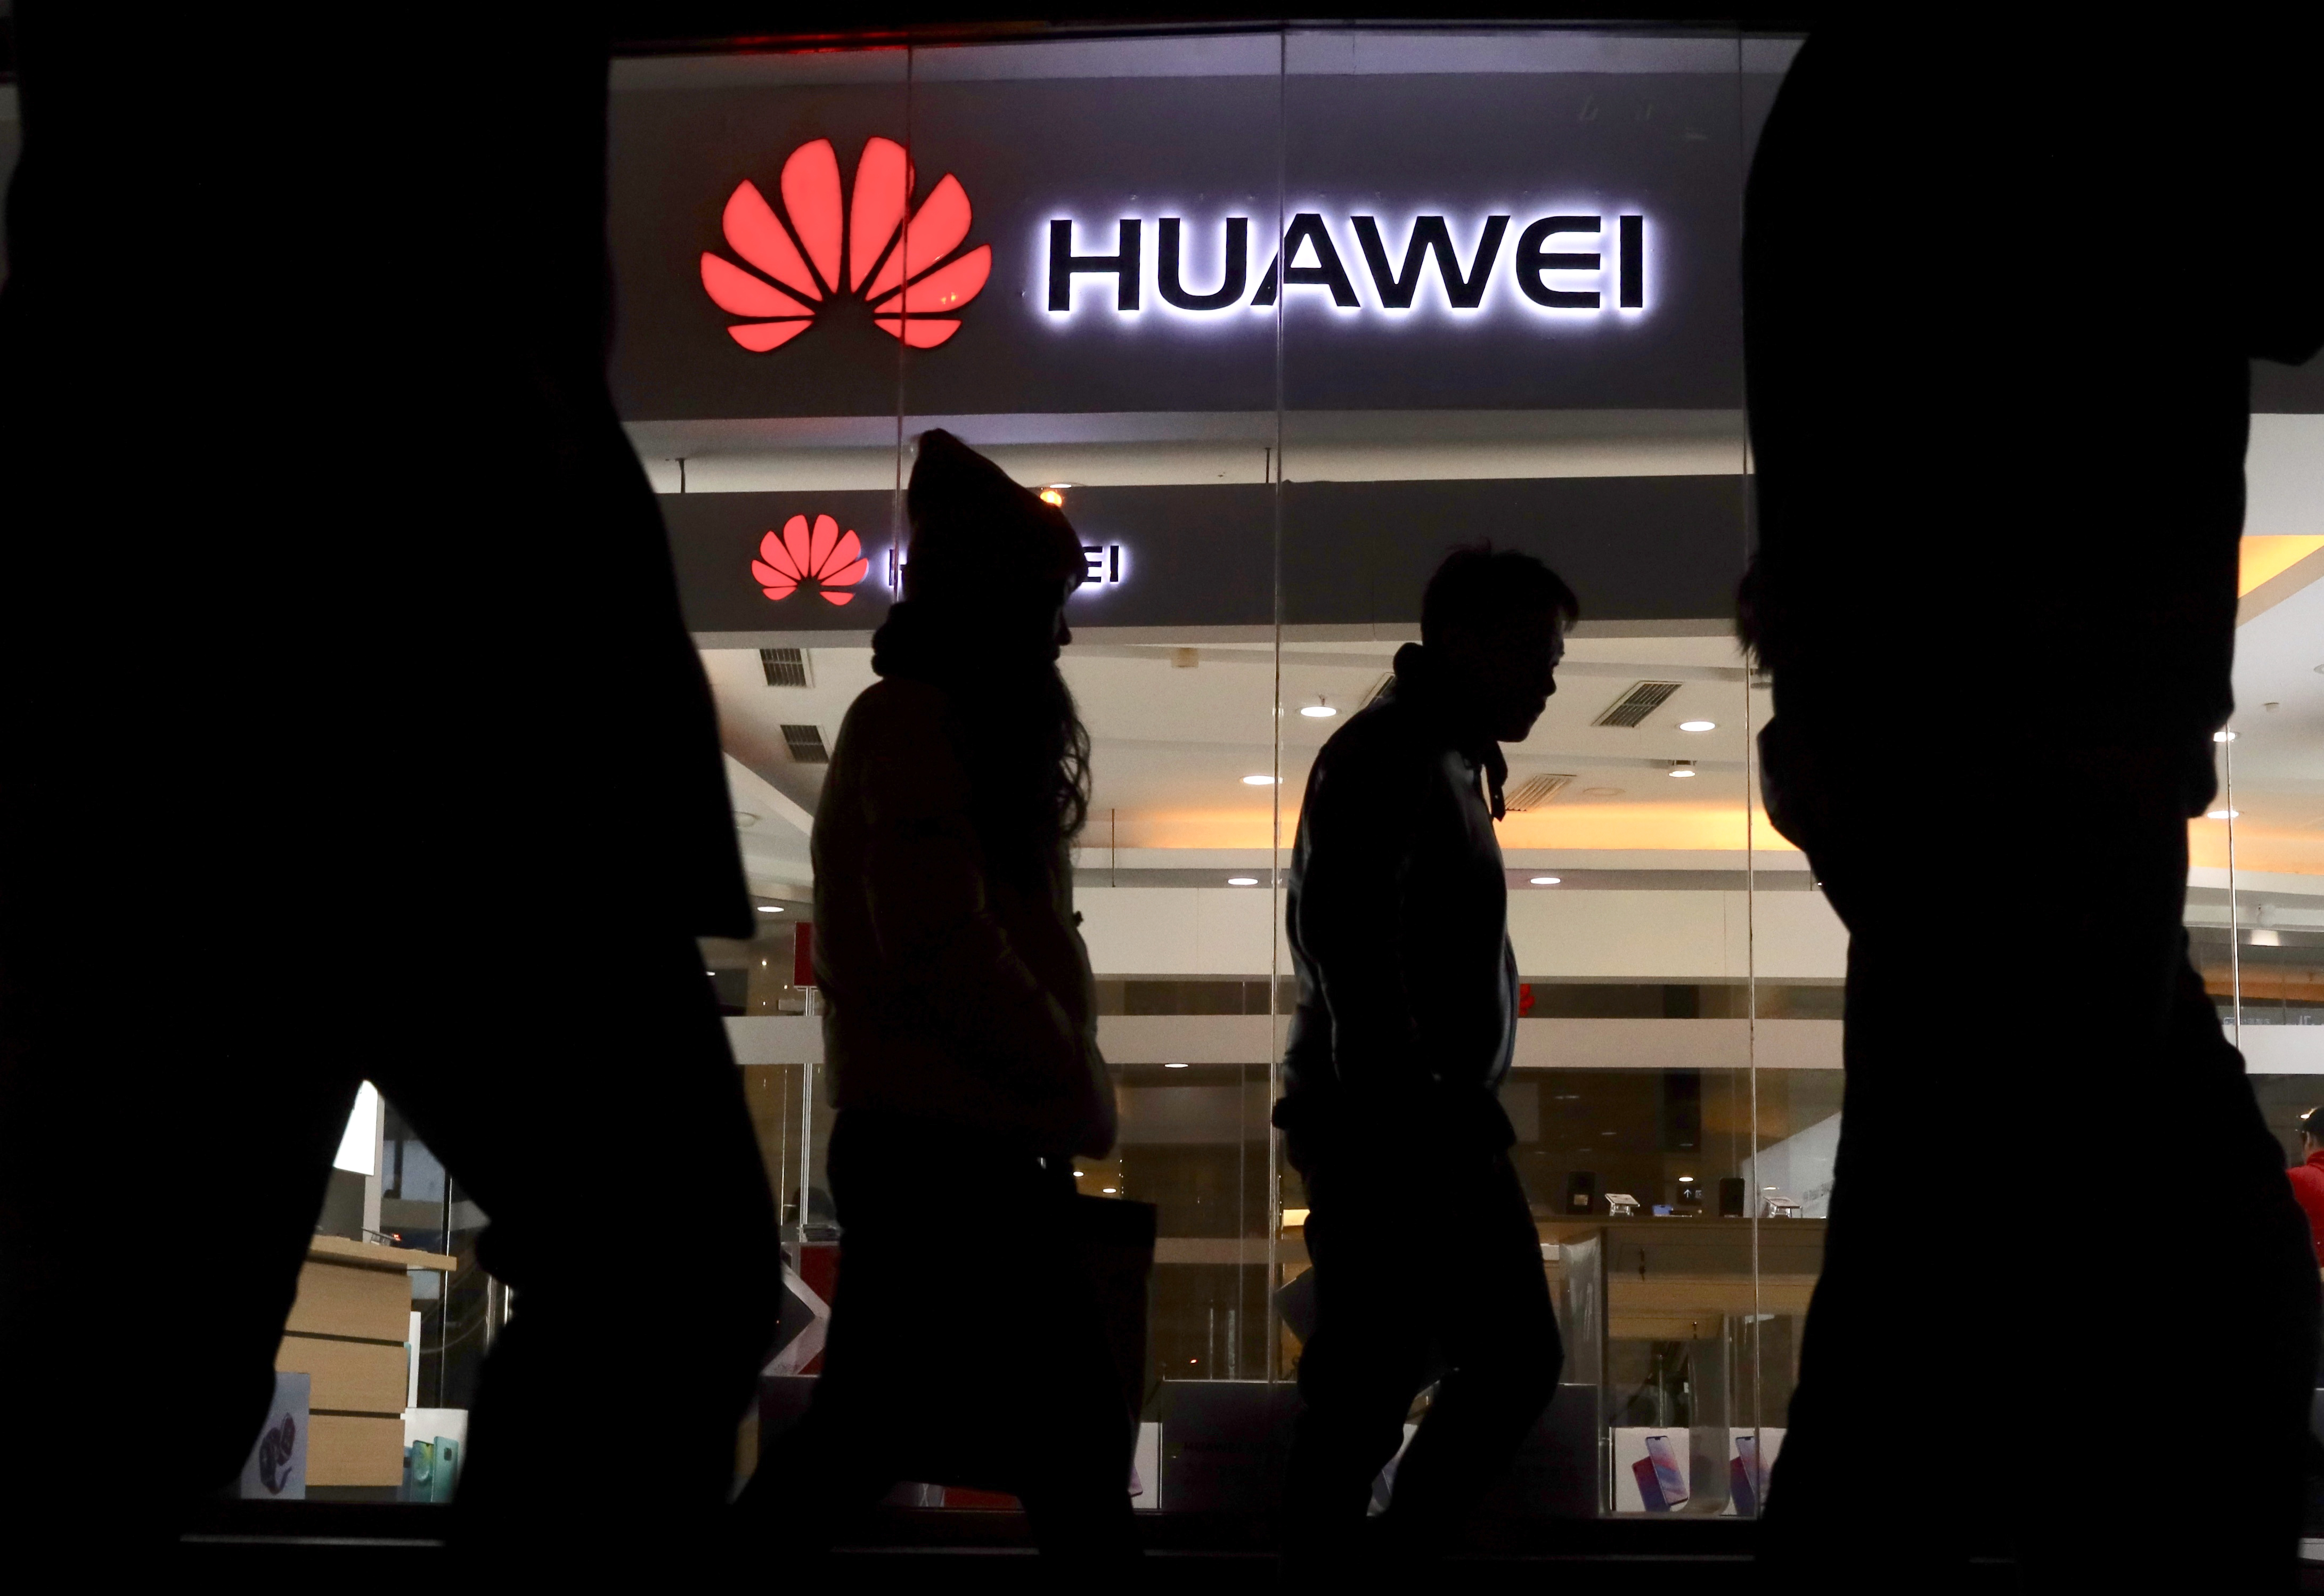 jammer gun ownership countries , Executive’s Arrest, Security Worries Stymie Huawei’s Reach